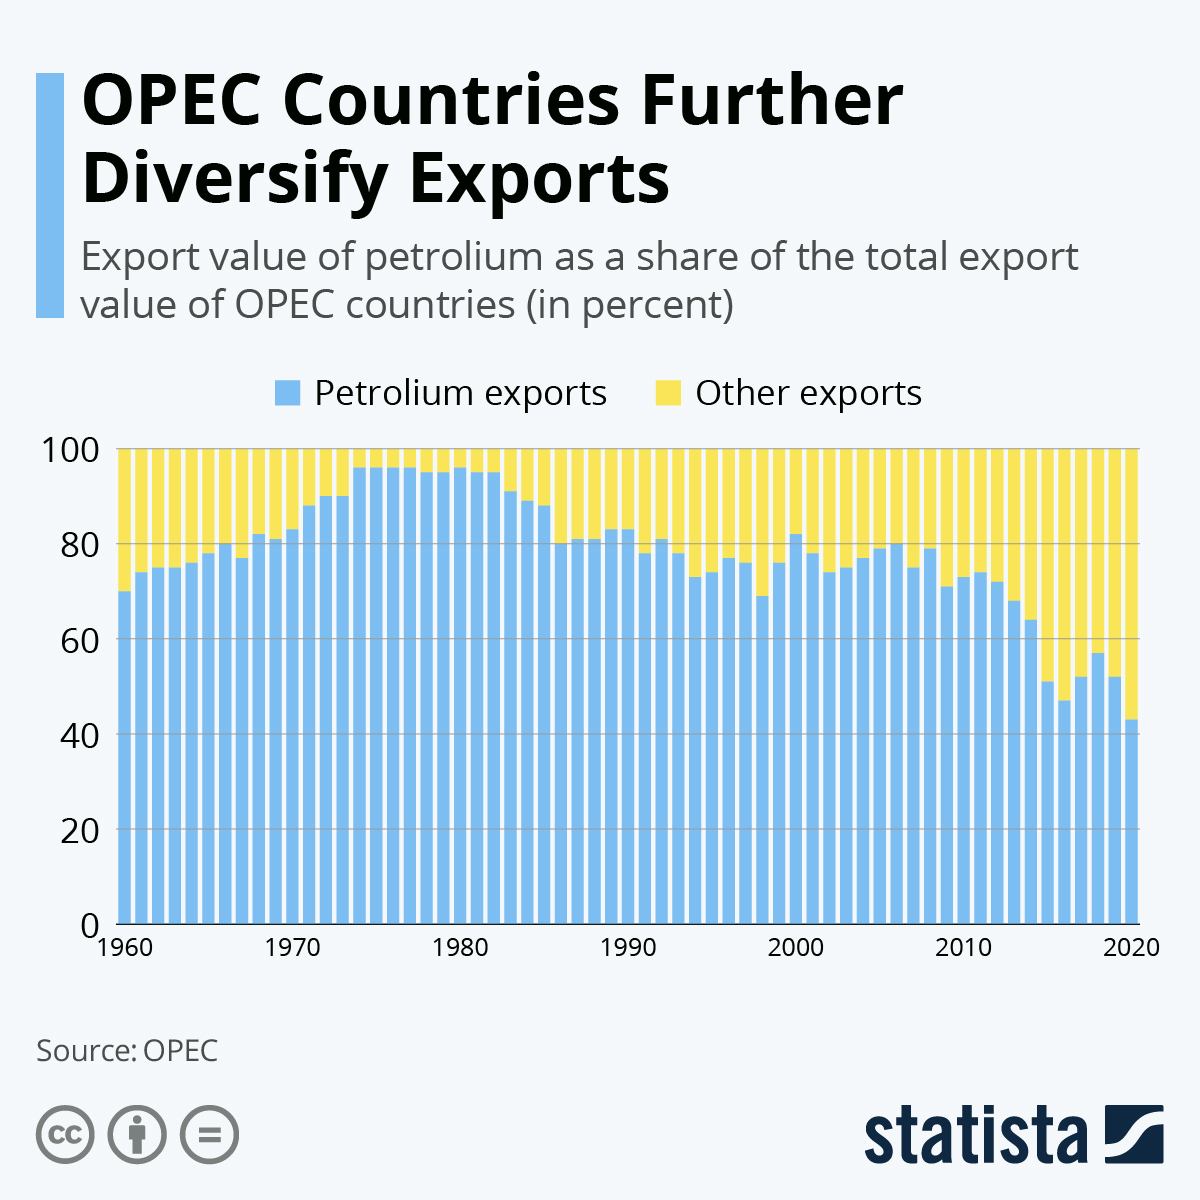 OPEC Countries Further Diversify Exports